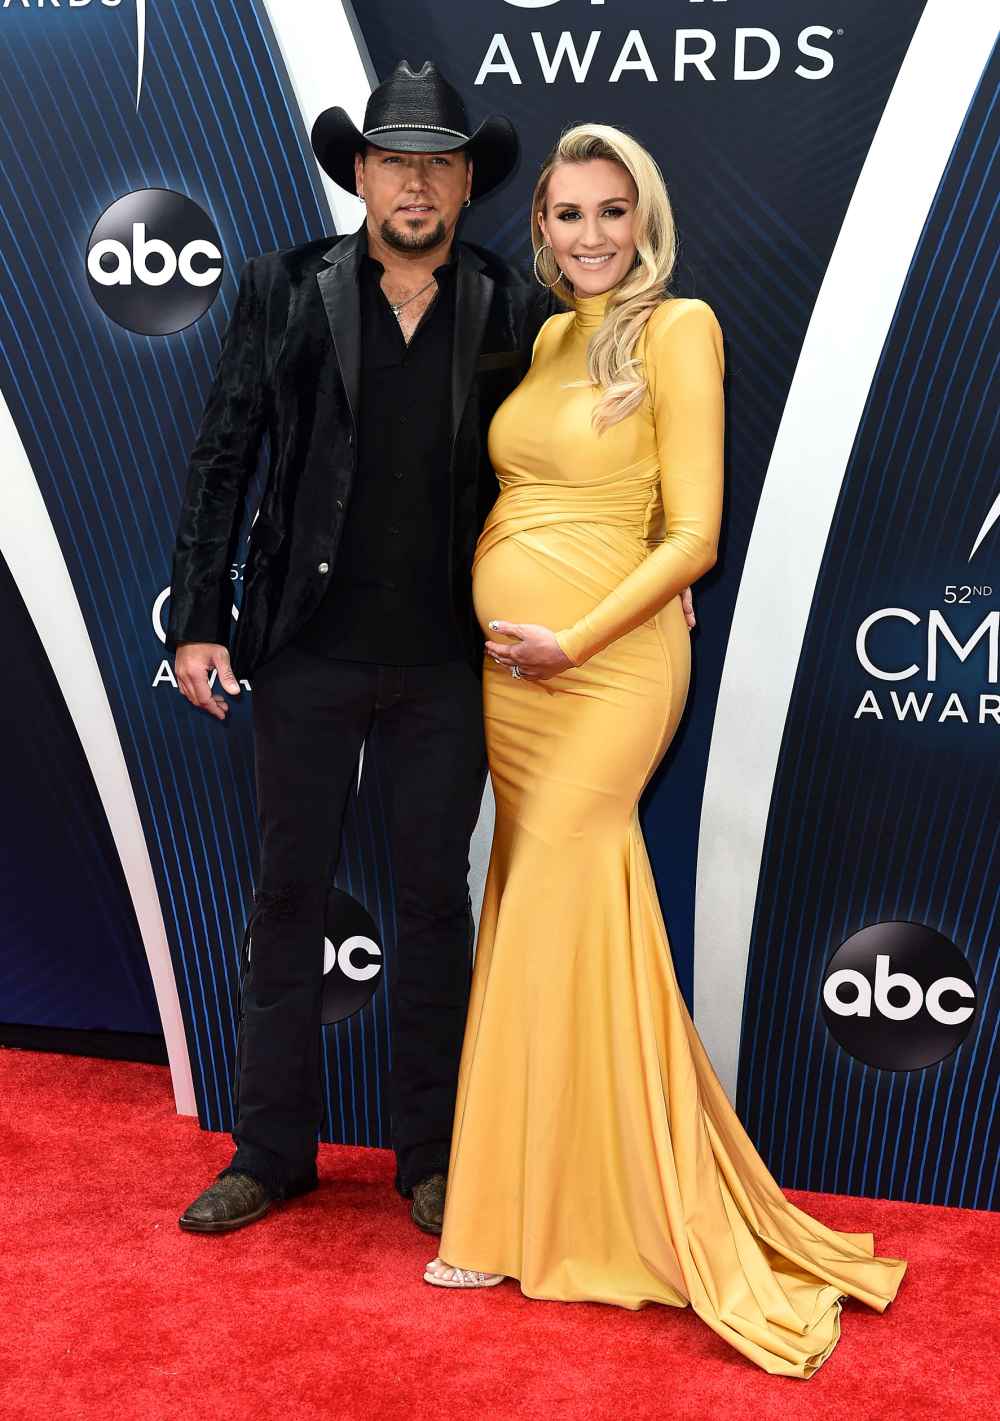 Jason Aldean and Wife Brittany Aldean Welcome Second Child Together — a Baby Girl!